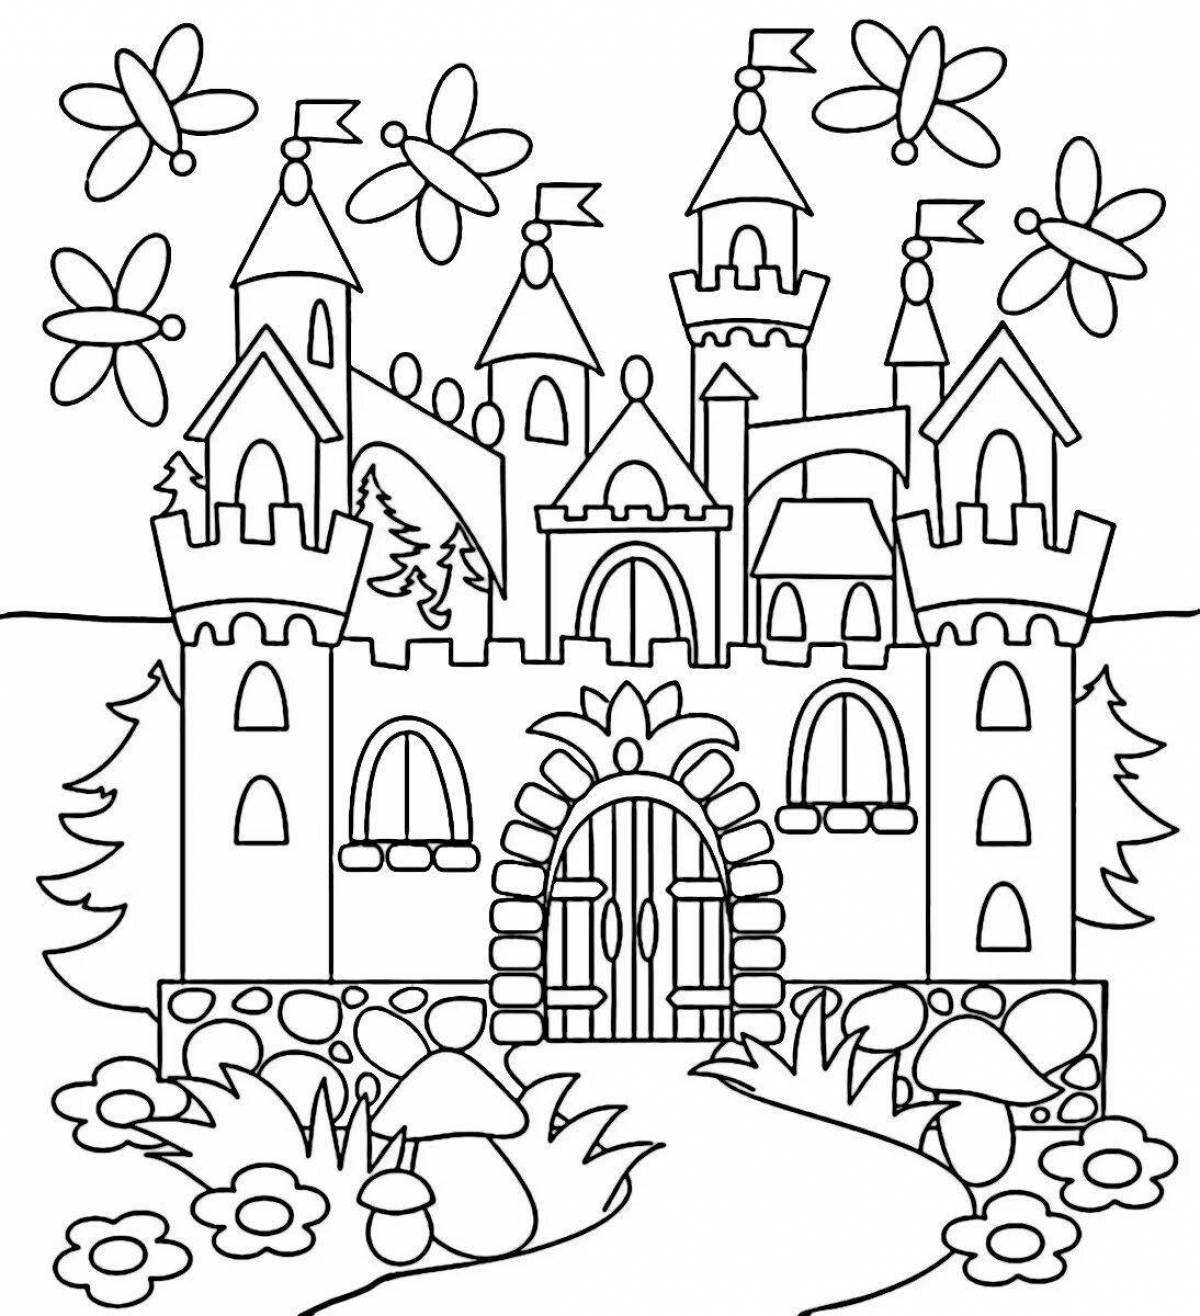 Coloring page charming fairytale castle